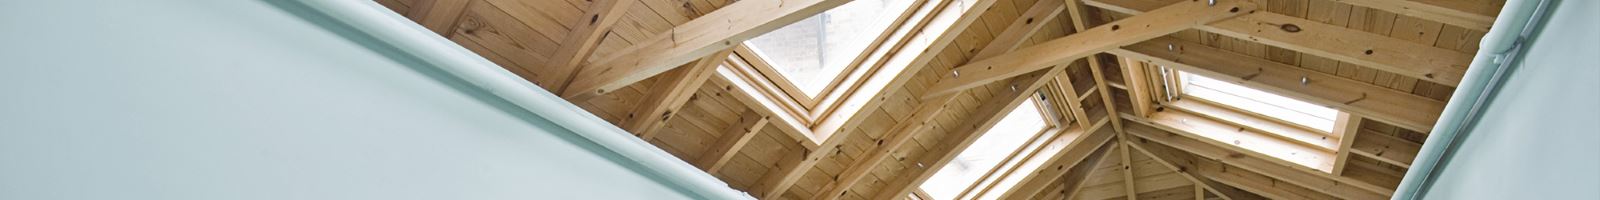 loft conversion wooden roof with velux windows